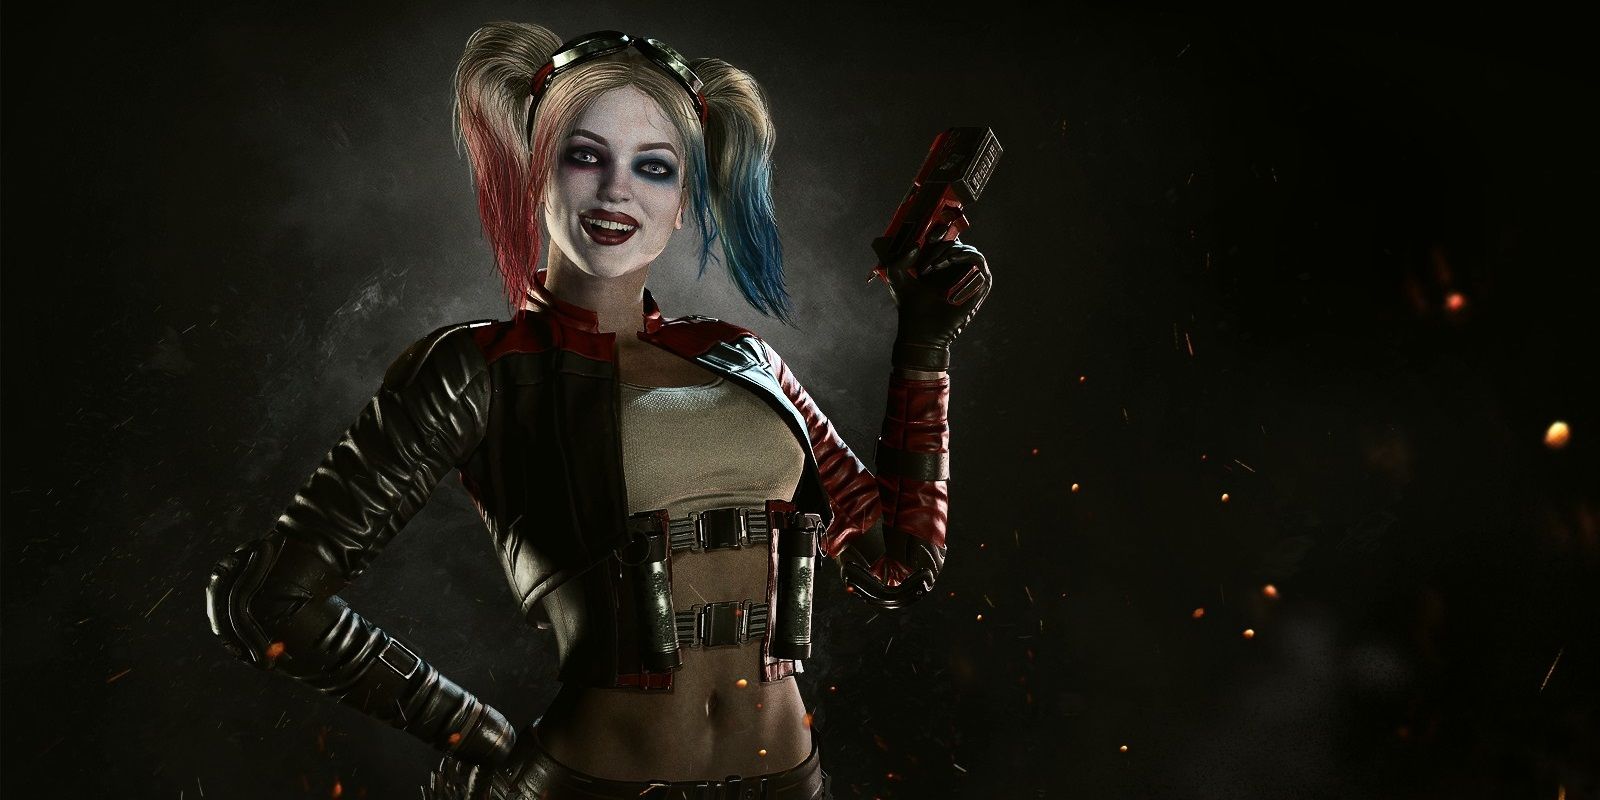 Harley Quinn's Injustice: Gods Among Us 2 outfit